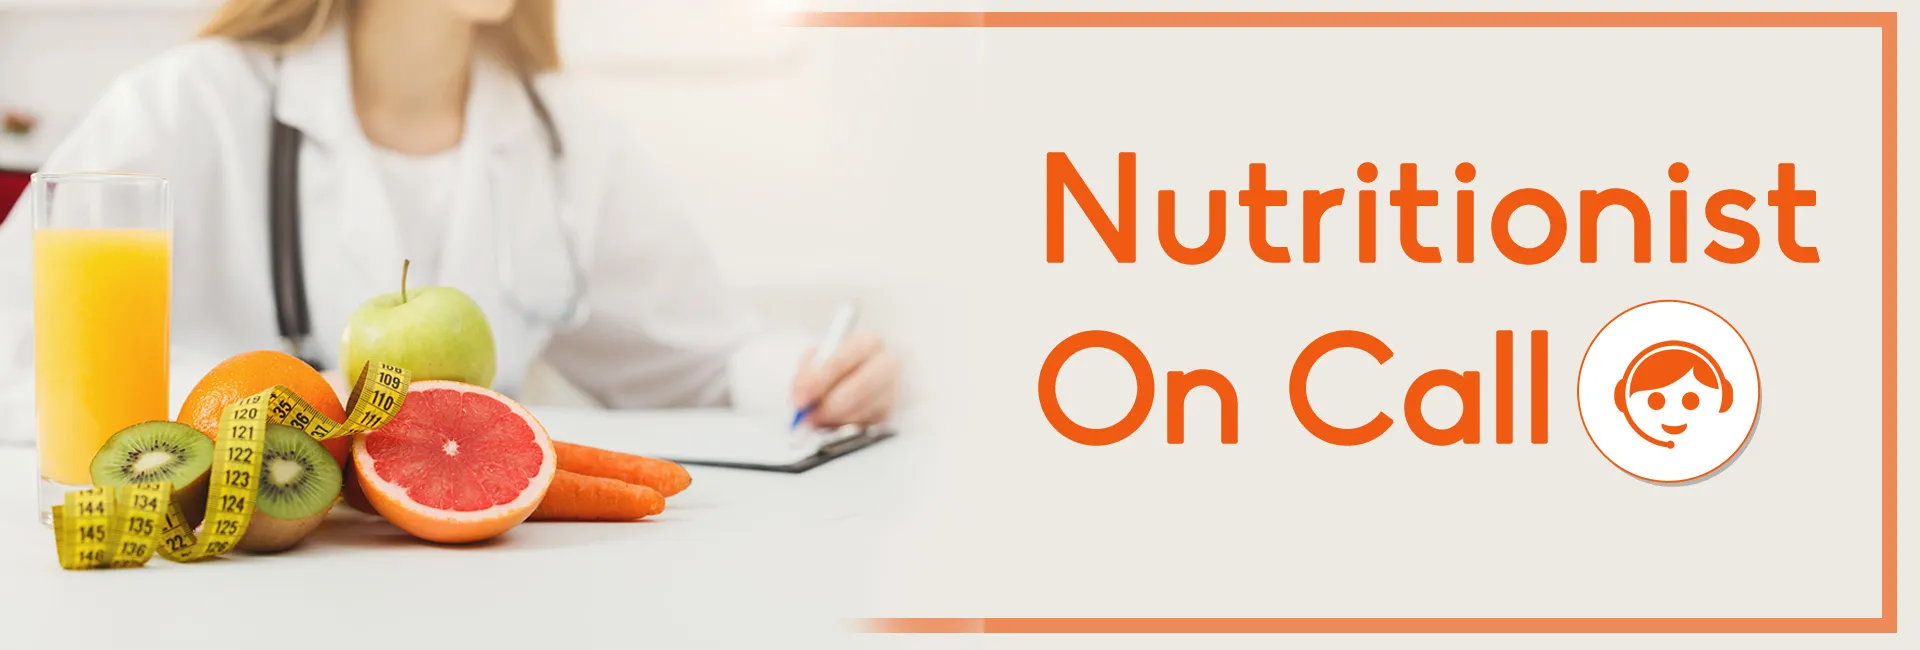 Nutritionist On Call In Timmins